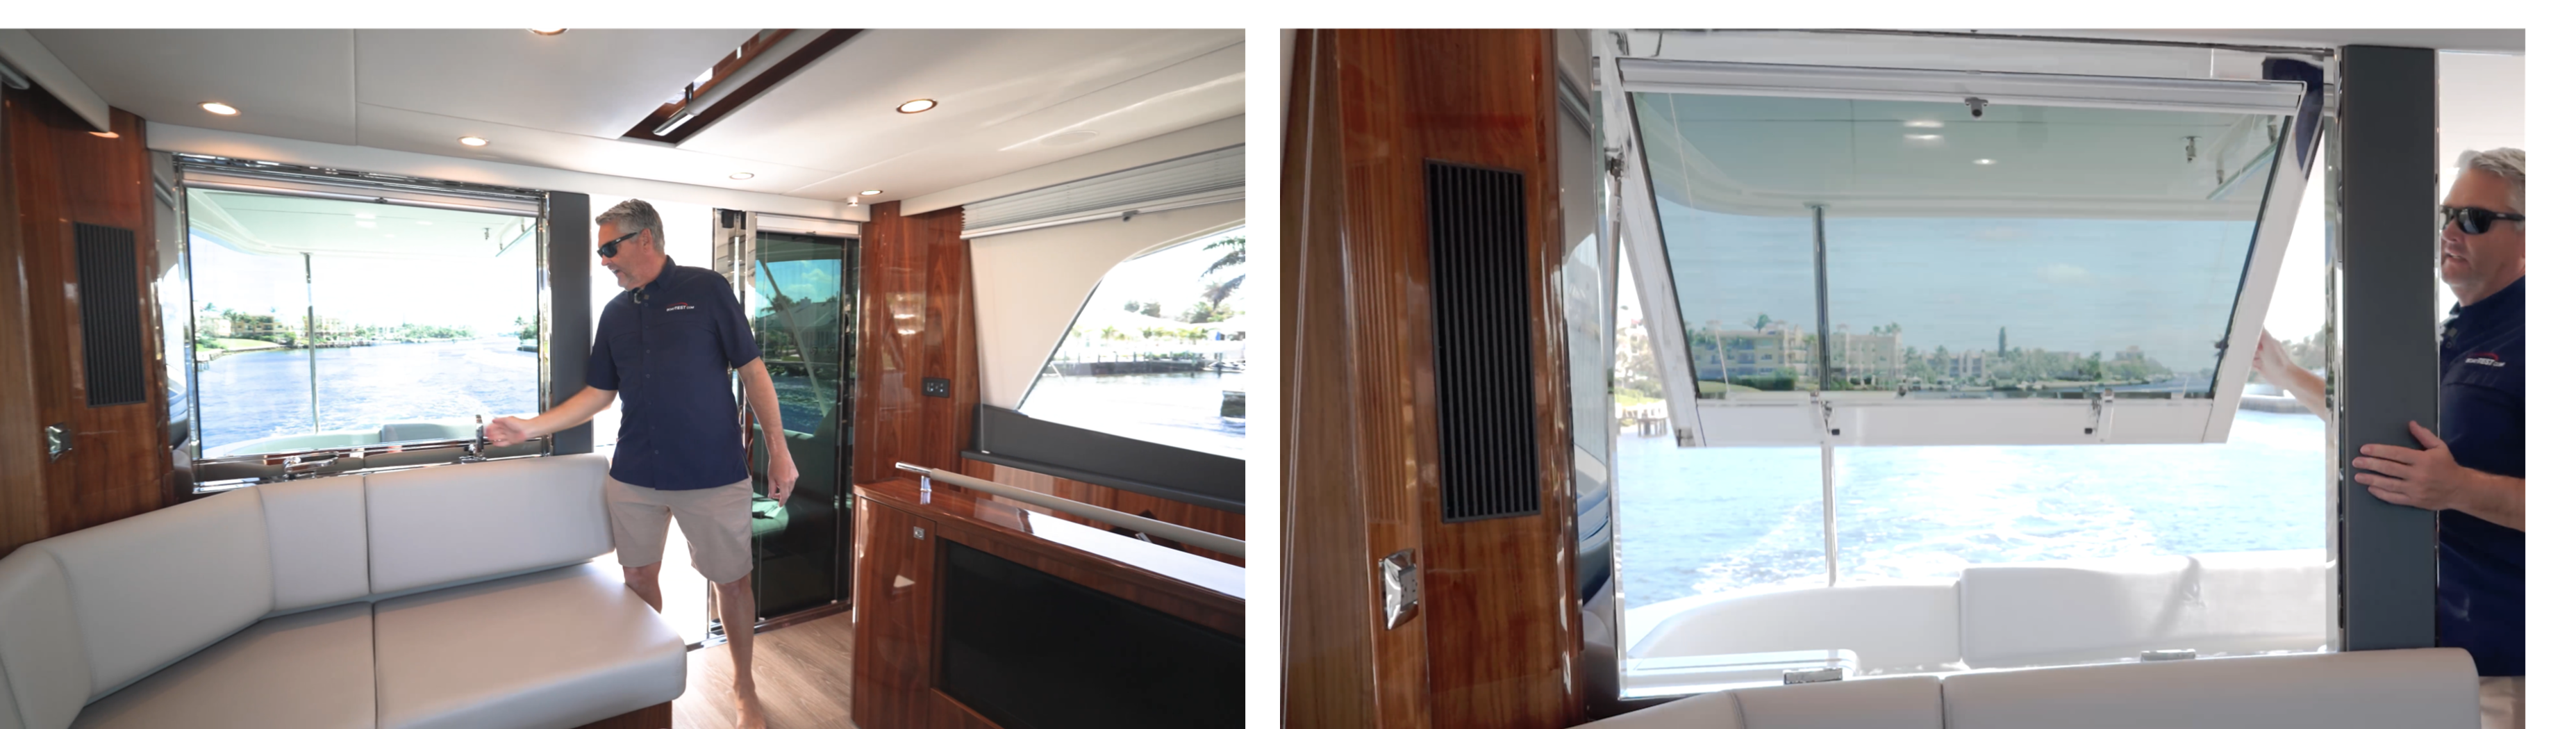 Riviera 58 SMY Glass panel abaft the entertainment seating opening onto the upper mezzanine